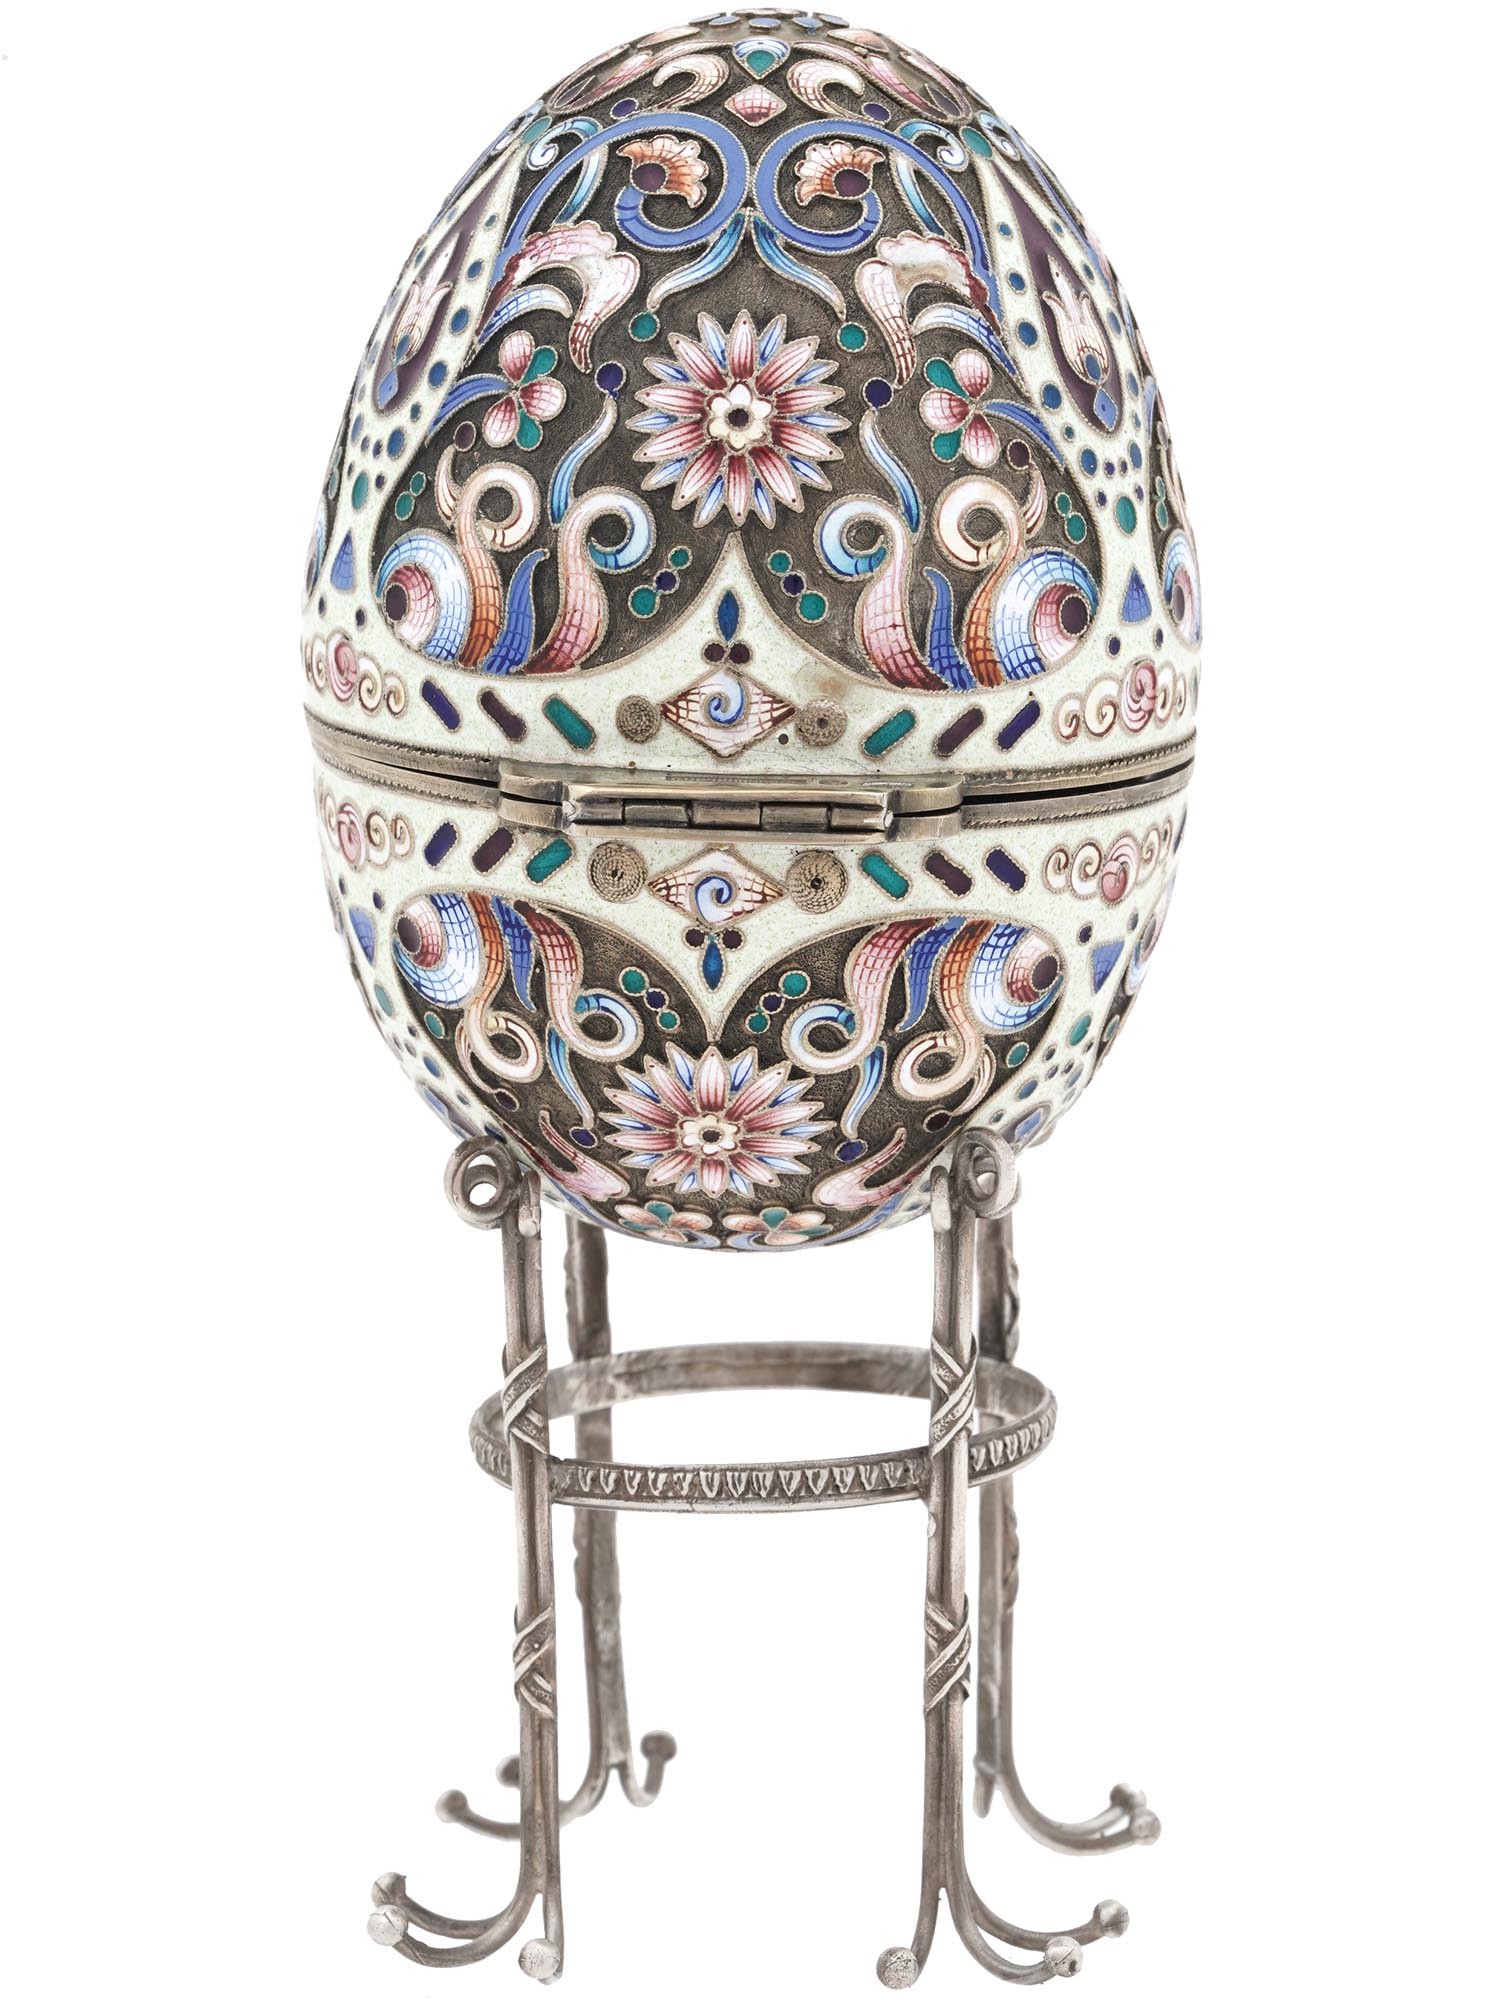 RUSSIAN 88 SILVER CLOISONNE ENAMEL EGG CASE STAND PIC-2